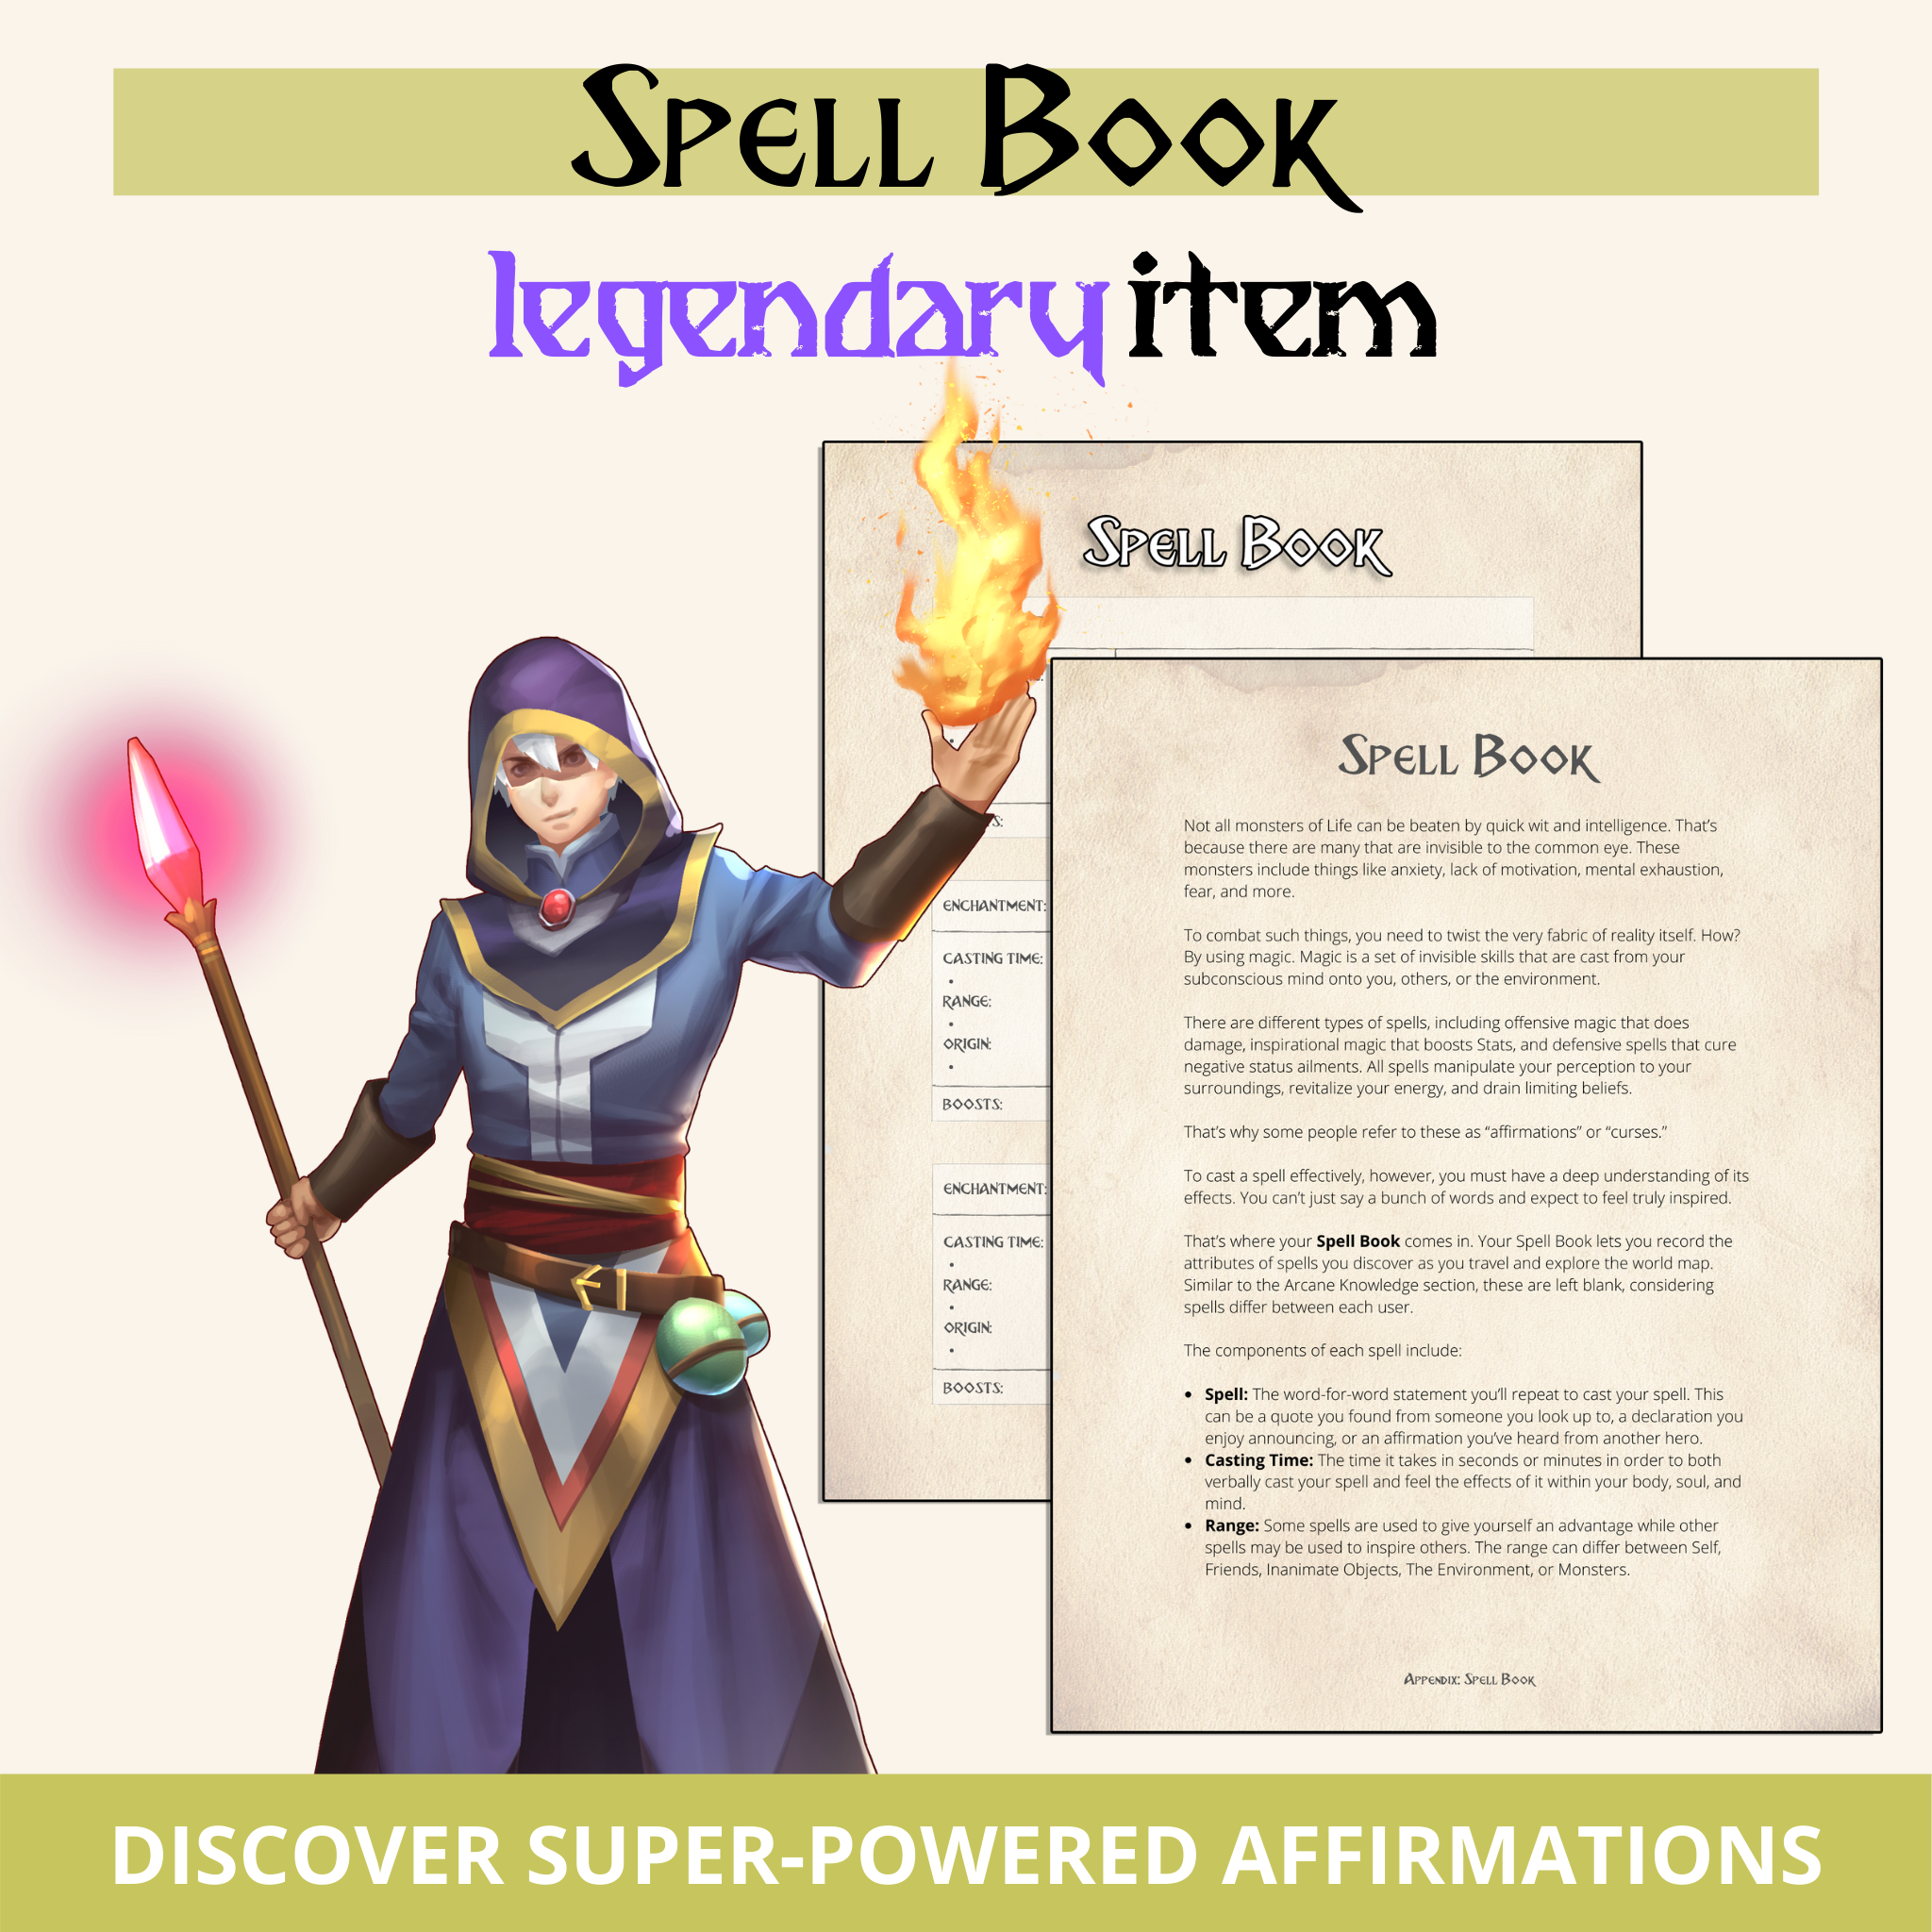 The Complete Adventurer's Toolkit Bundle: Action Guides & Printable PDF